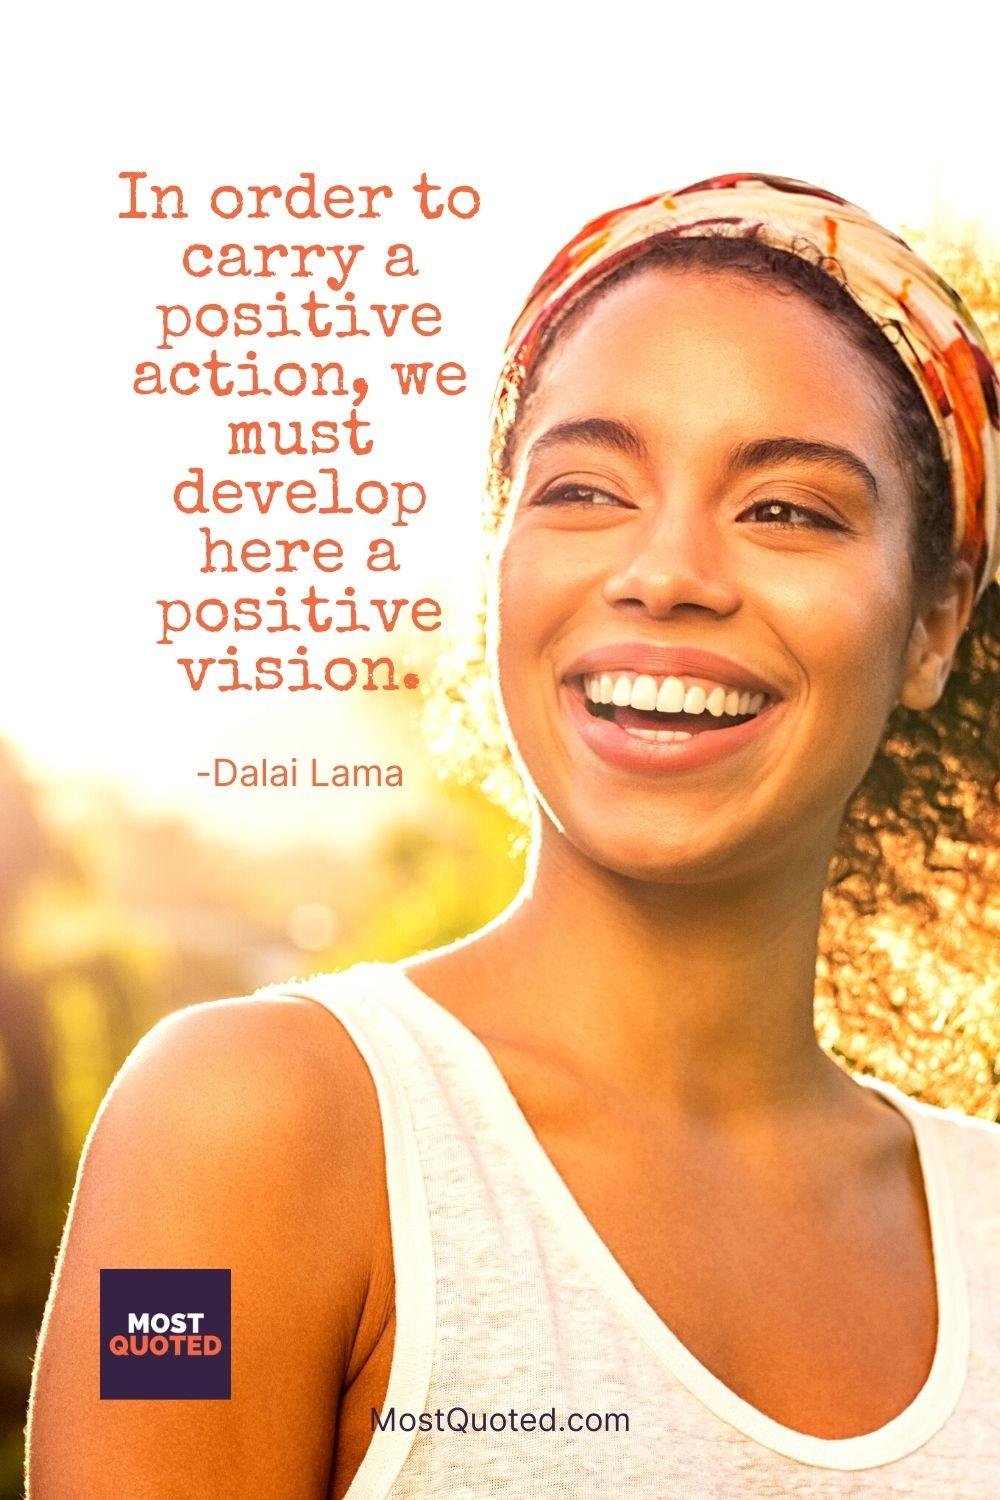 In order to carry a positive action, we must develop here a positive vision. - Dalai Lama